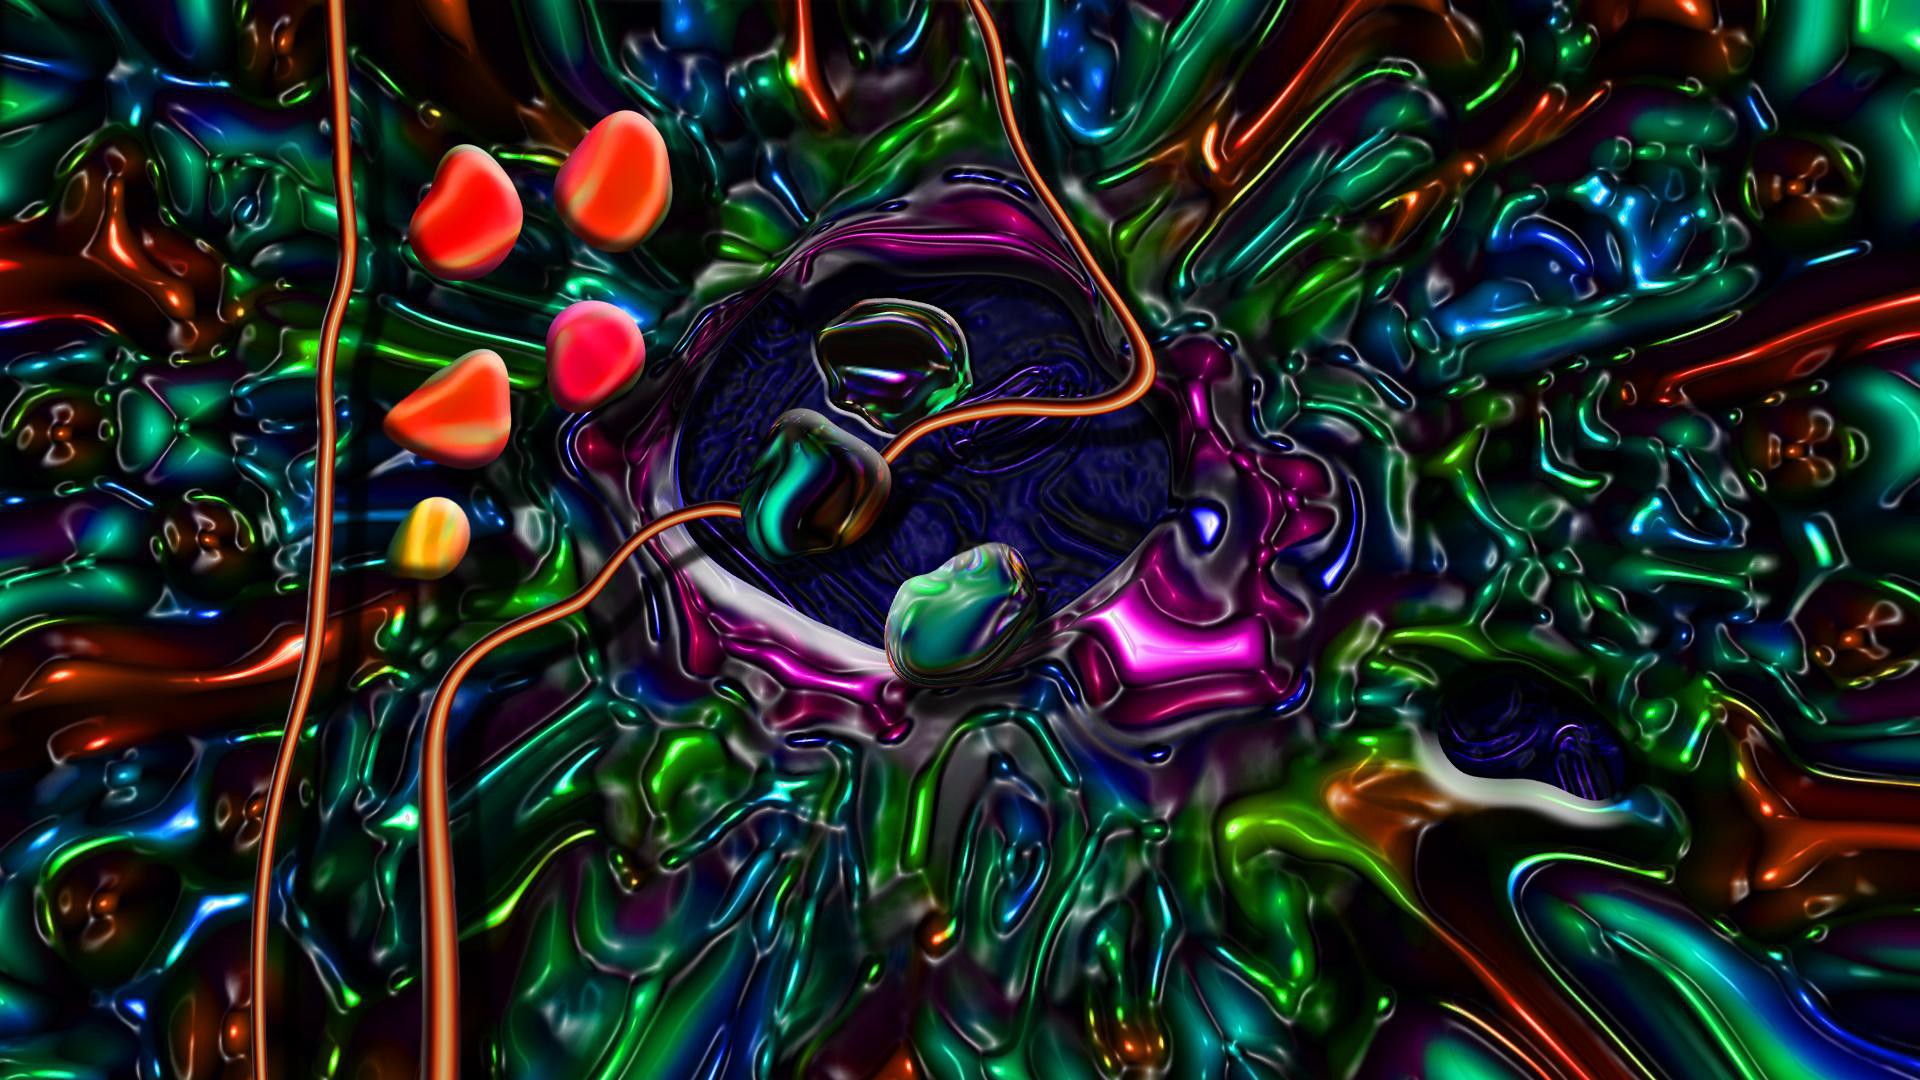 Psychedelic Pictures HD Galleryhip The Hippest